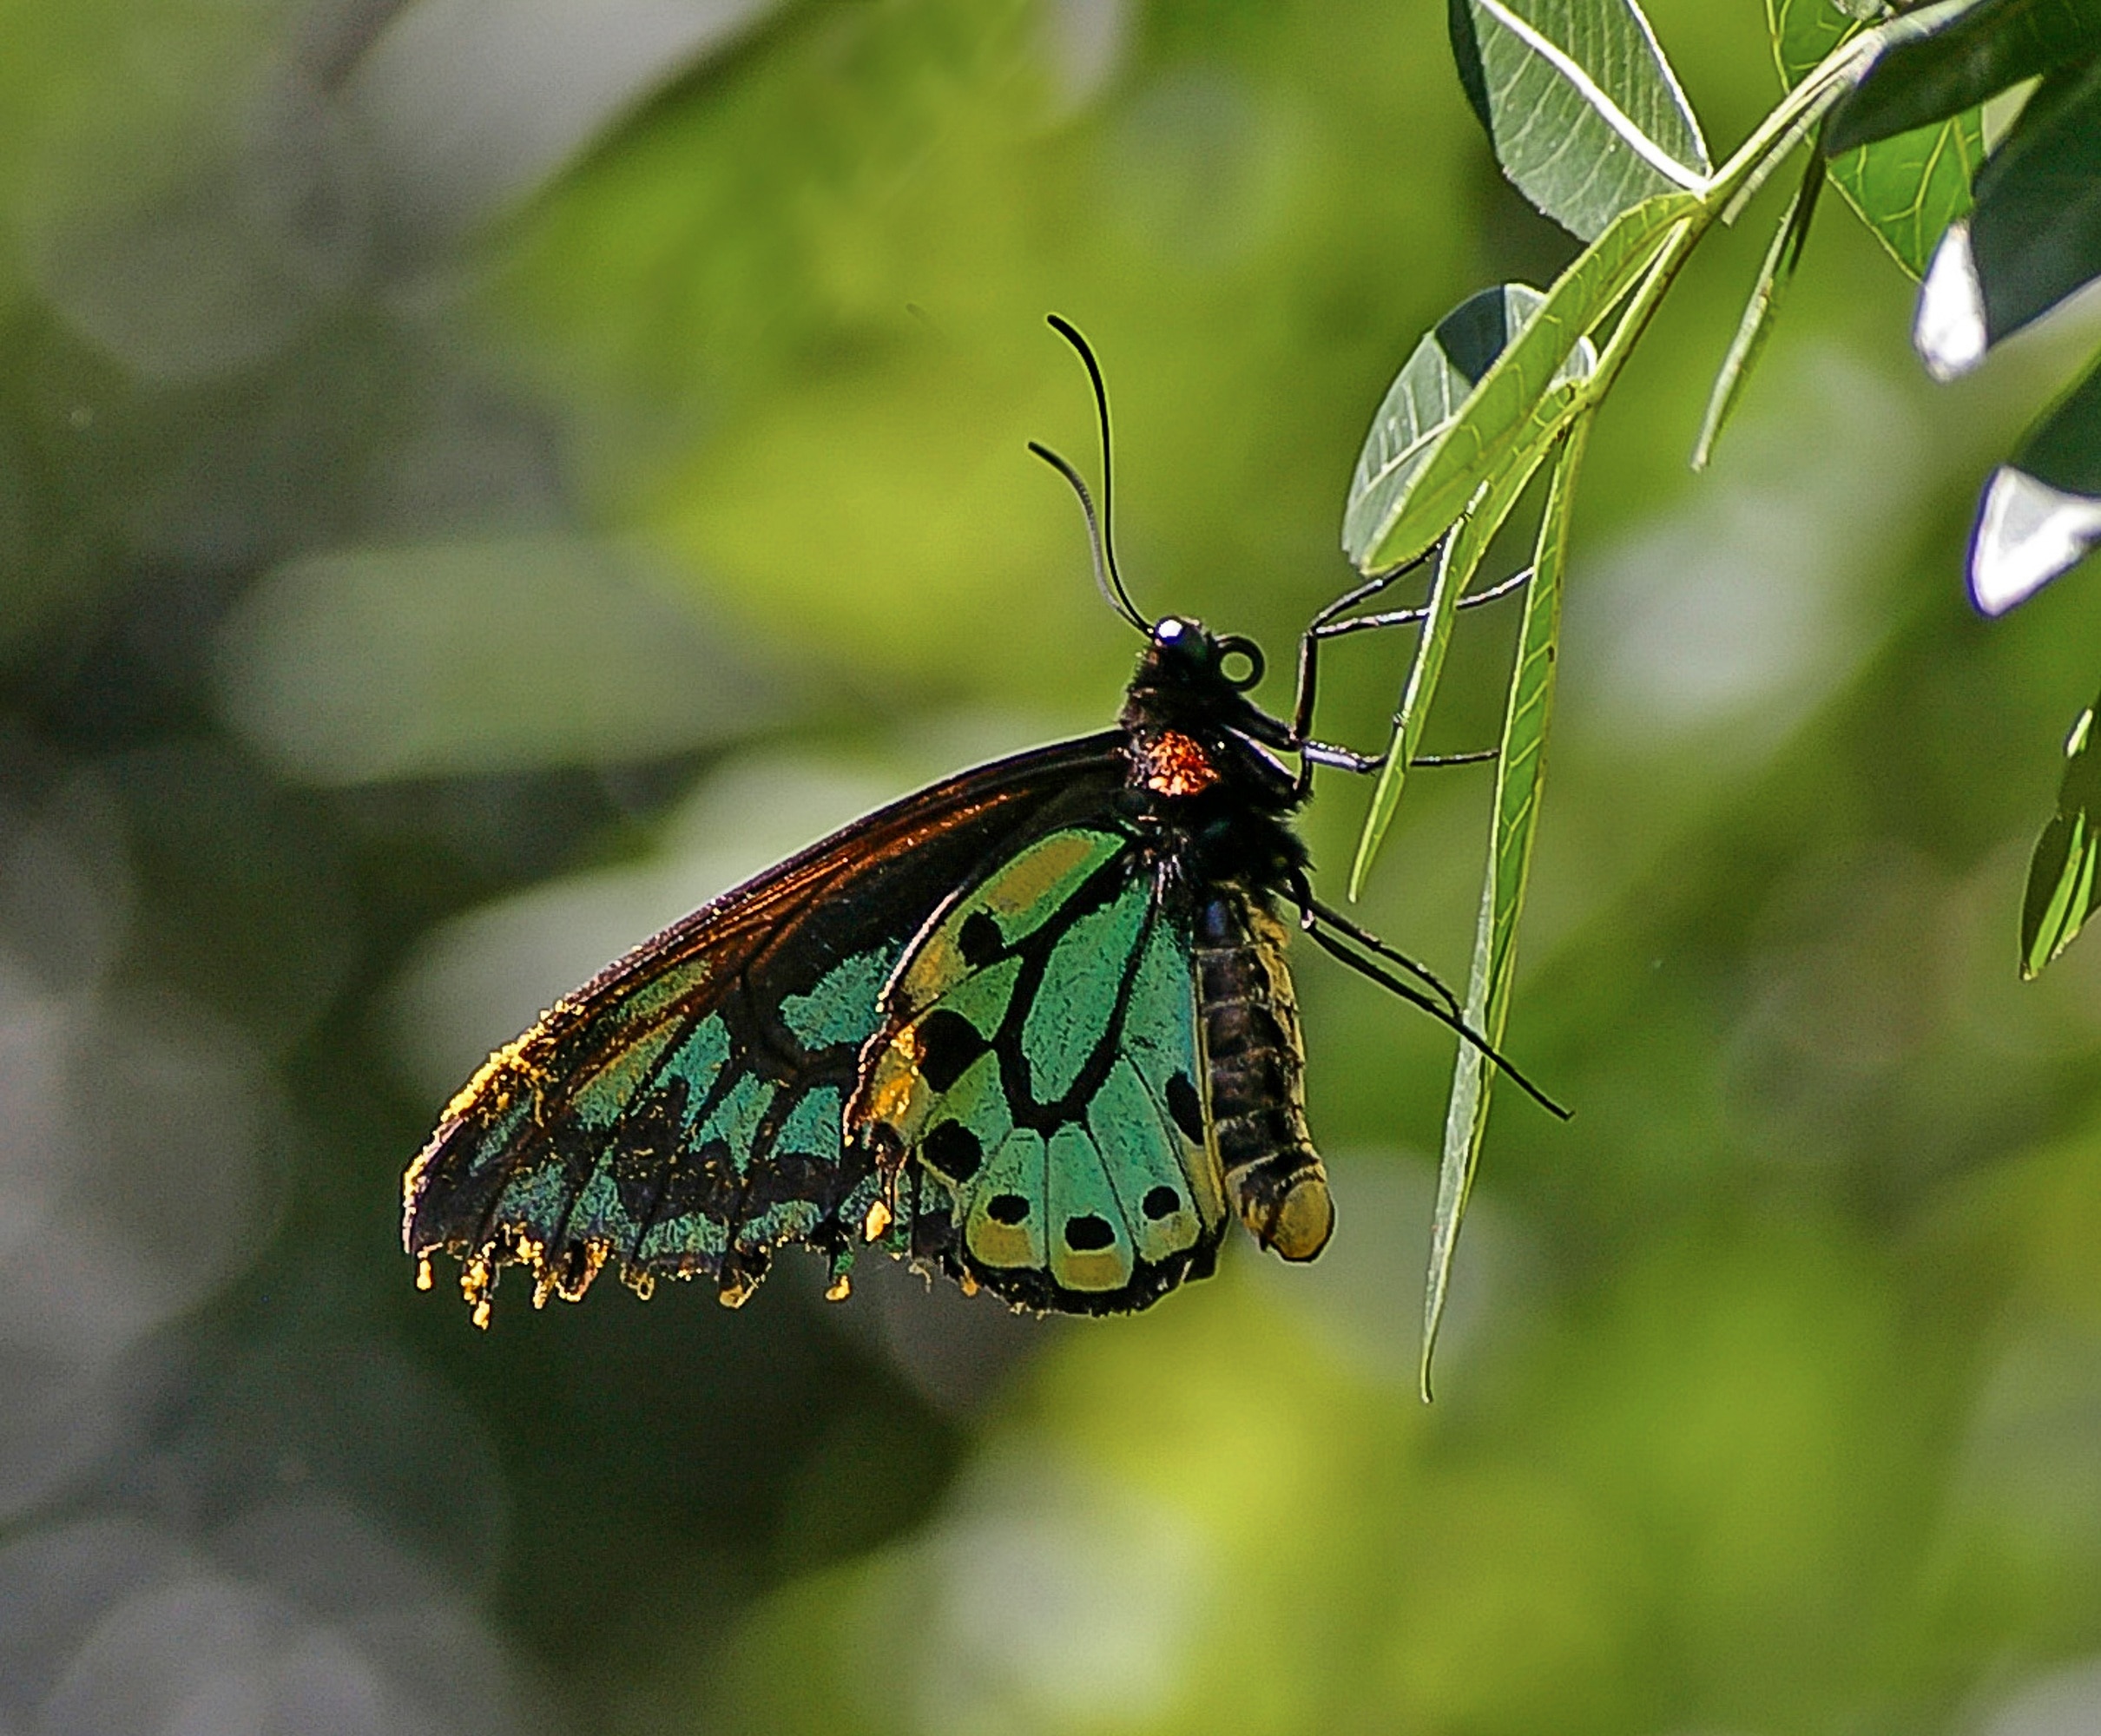 teal, brown, and yellow butterfly perched on green leaf during daytime